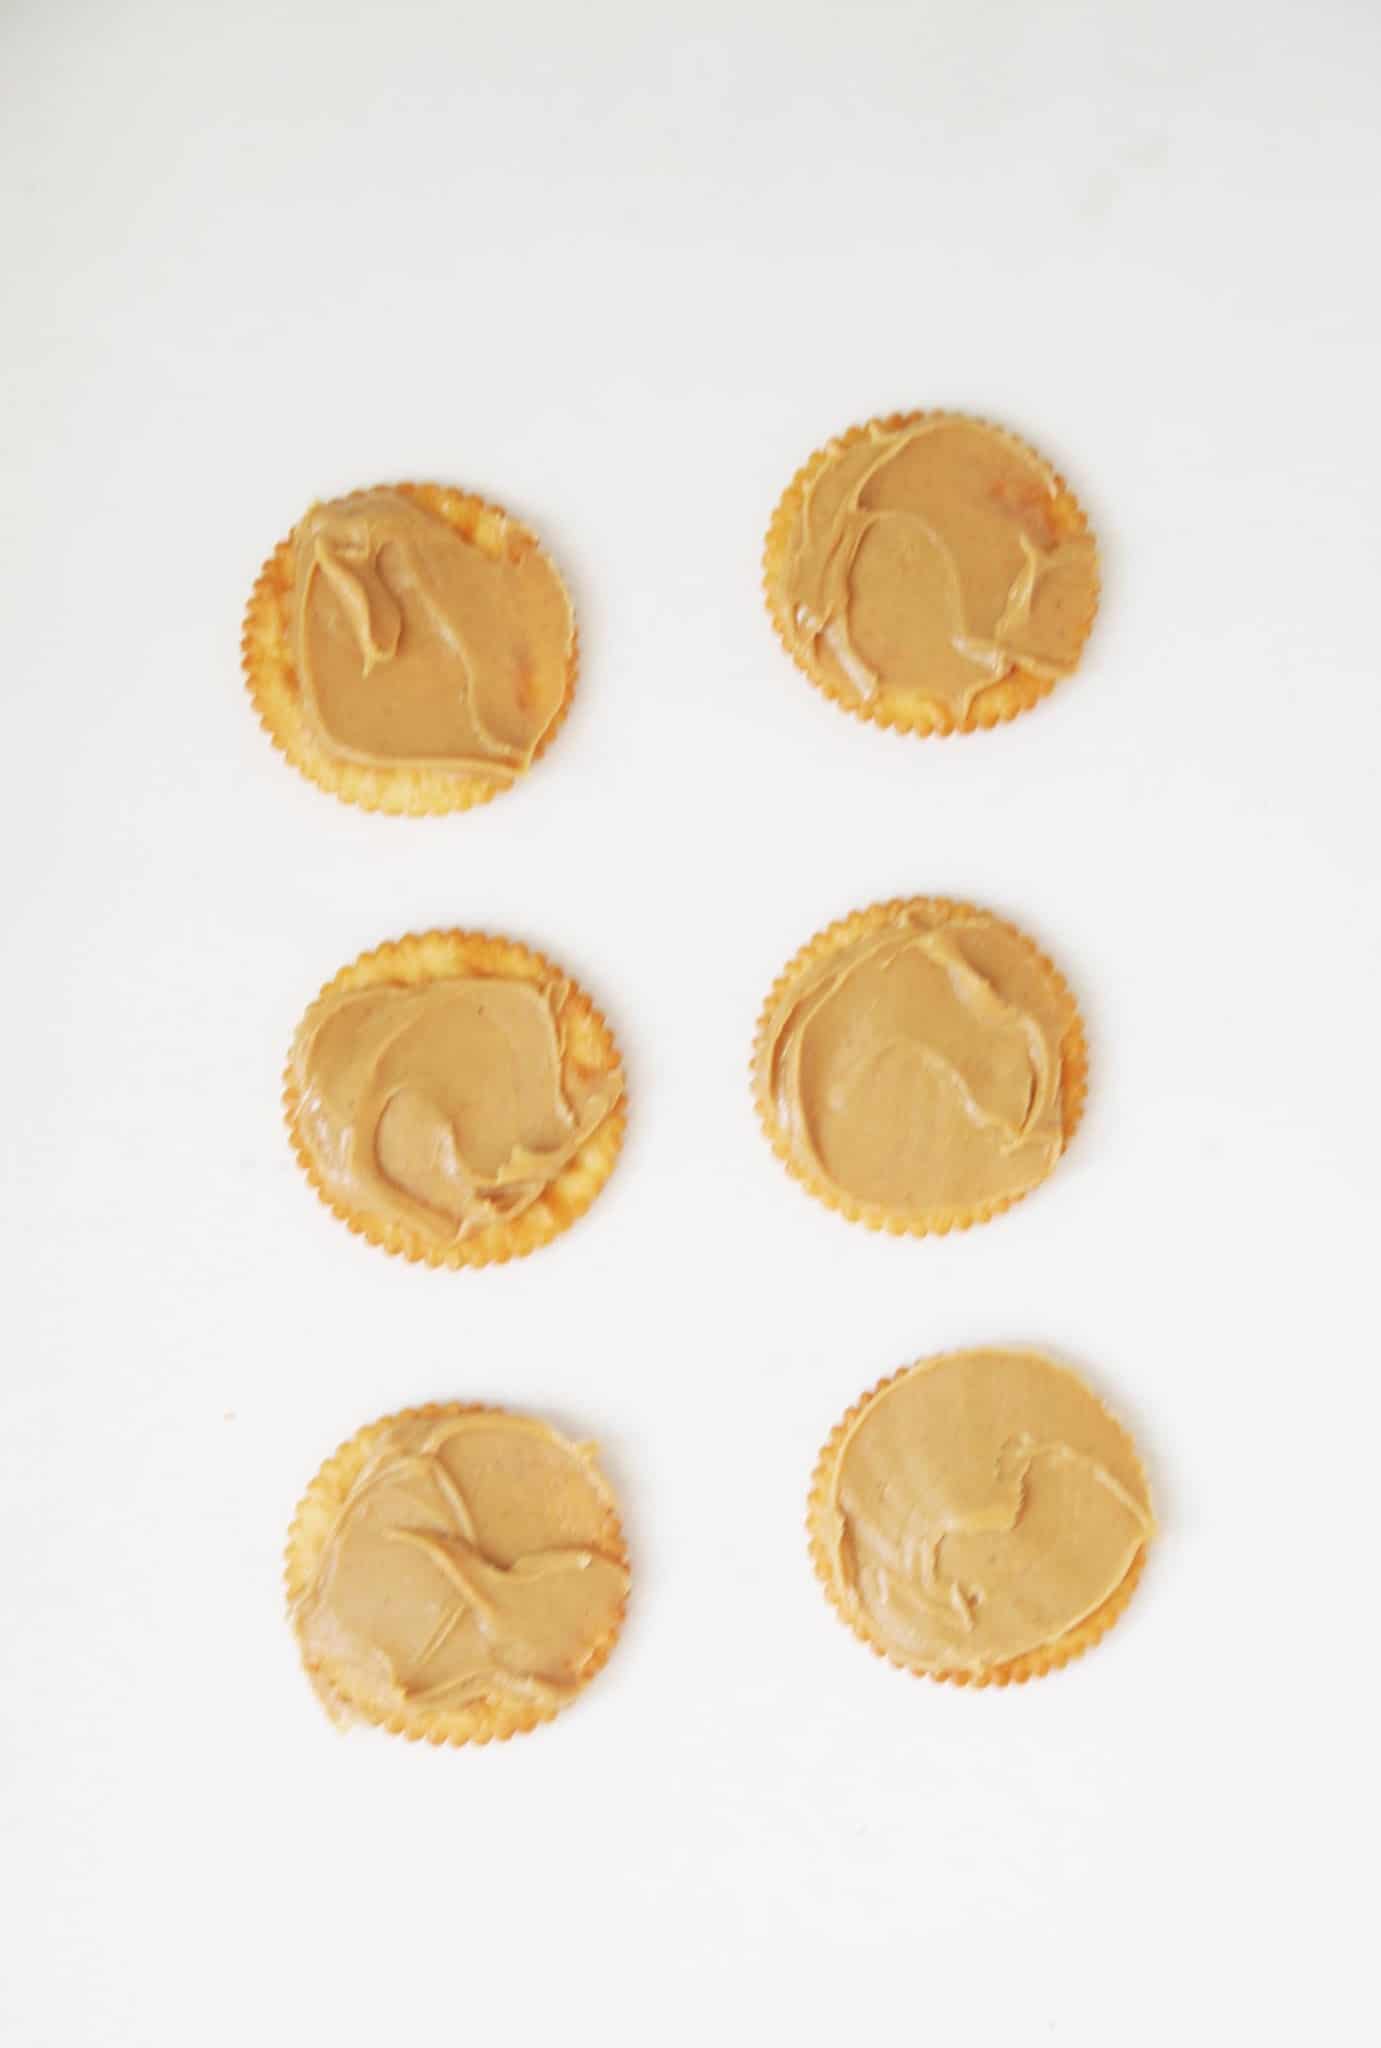 Peanut butter on top of crackers